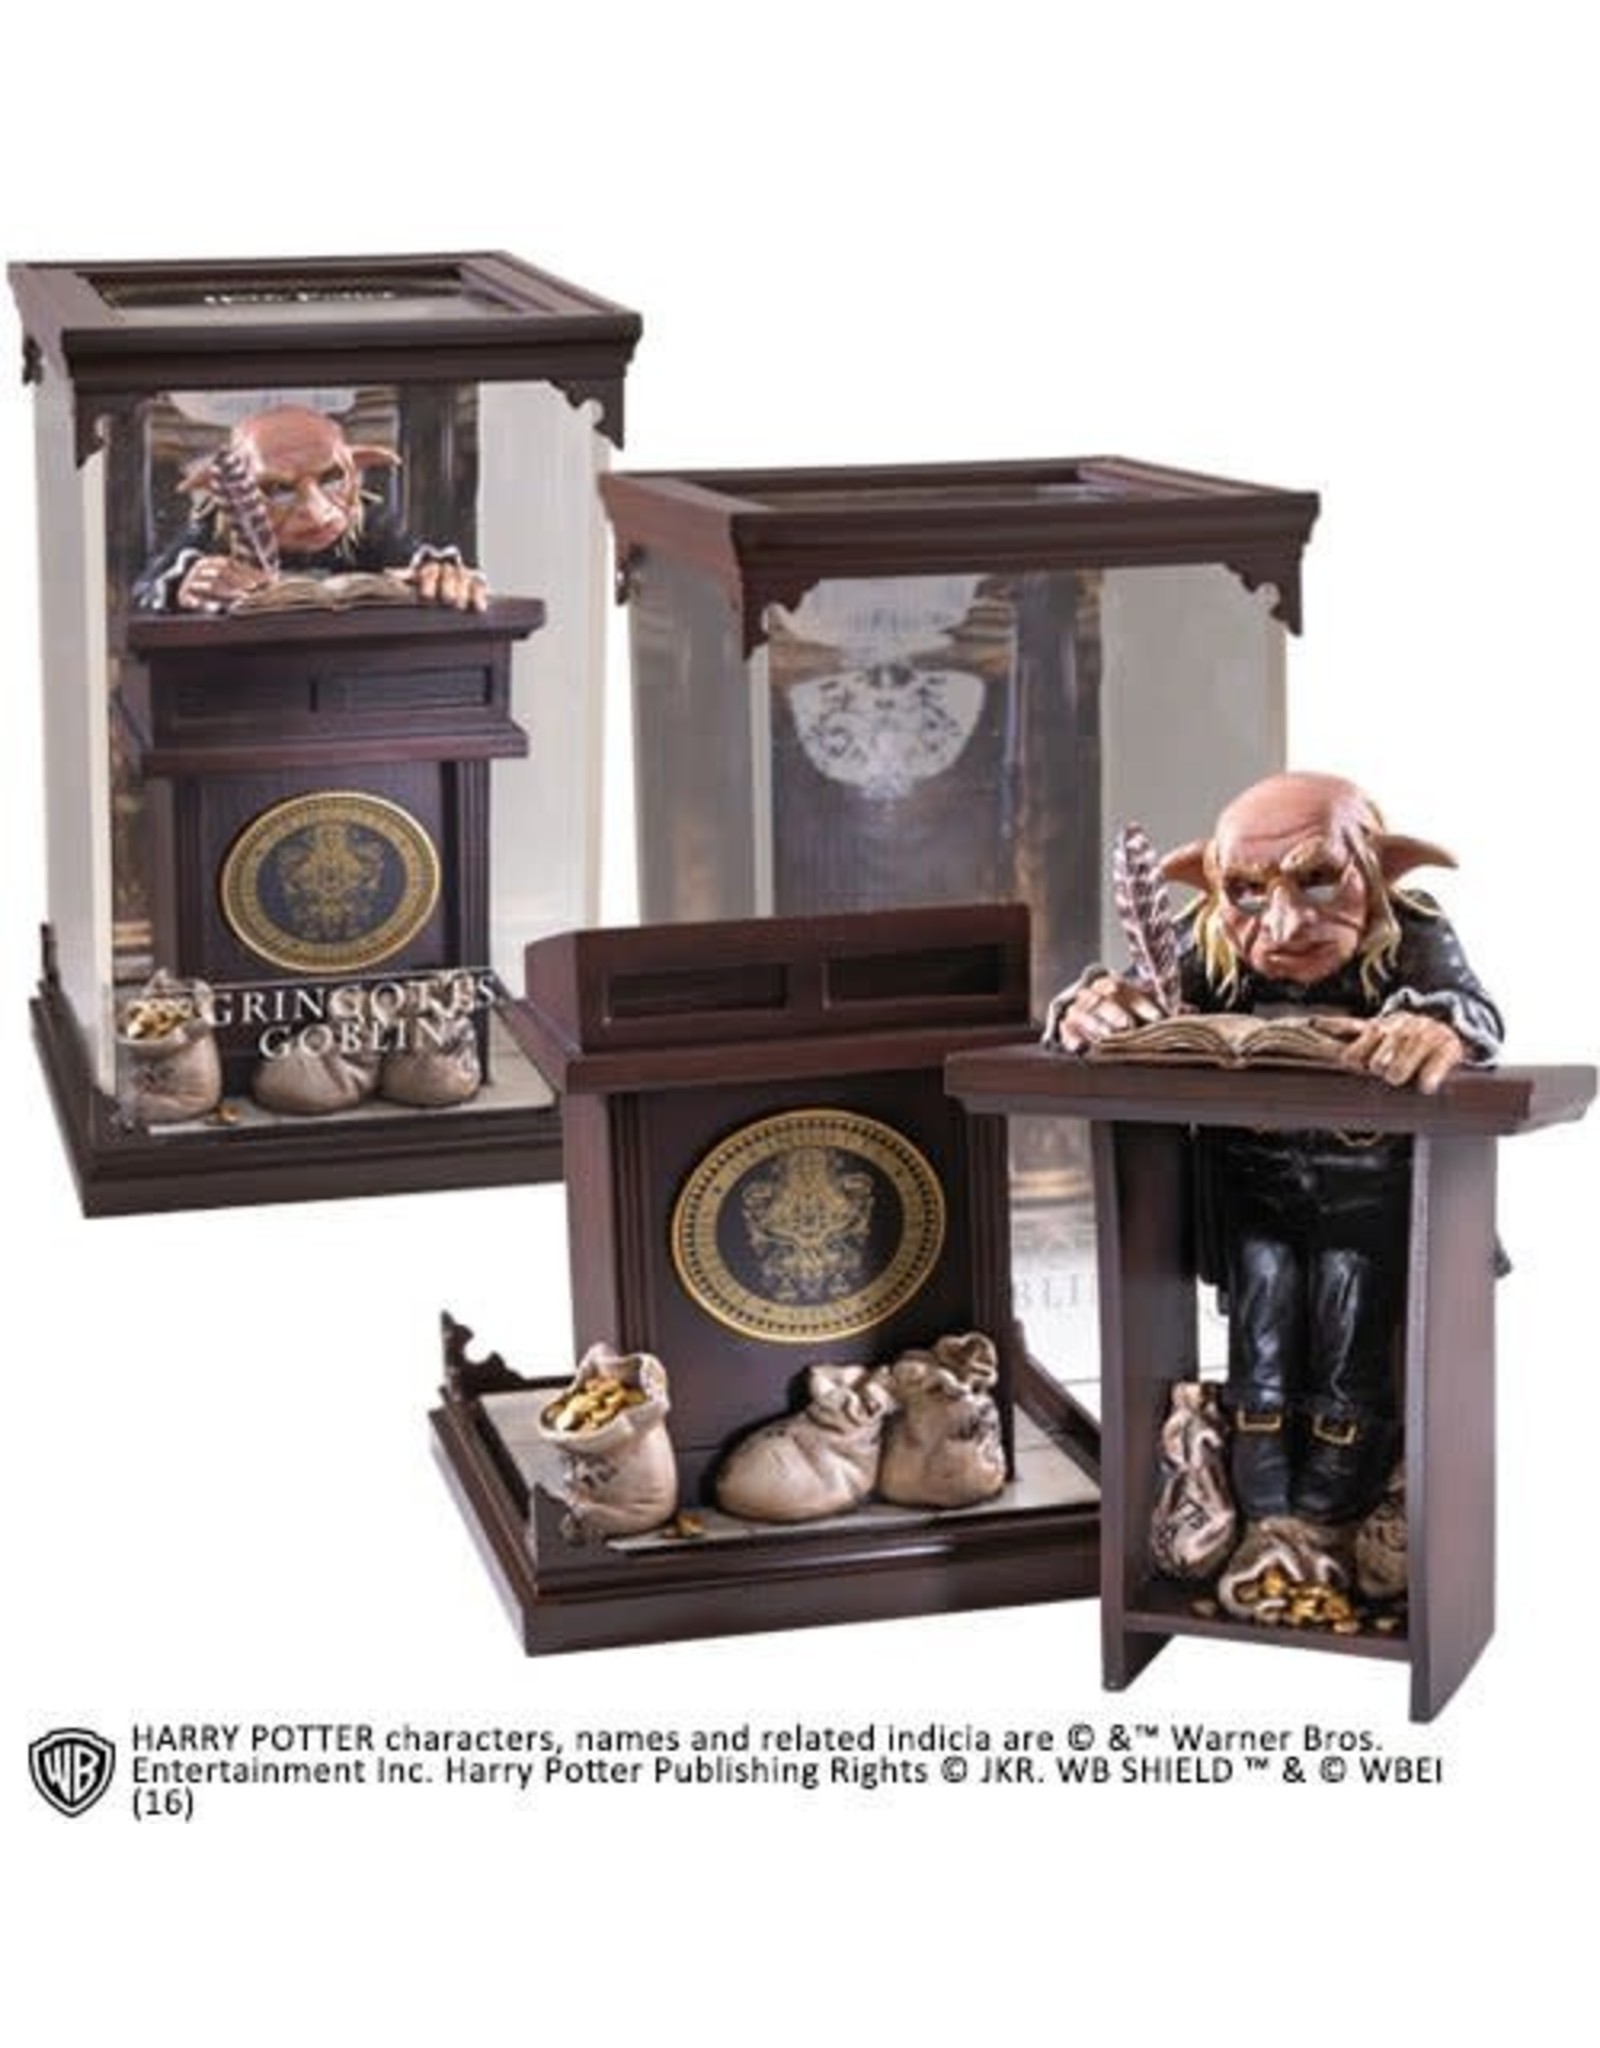 Noble Collection HARRY POTTER Magical Creatures Statue 10 - Gingotts Goblin